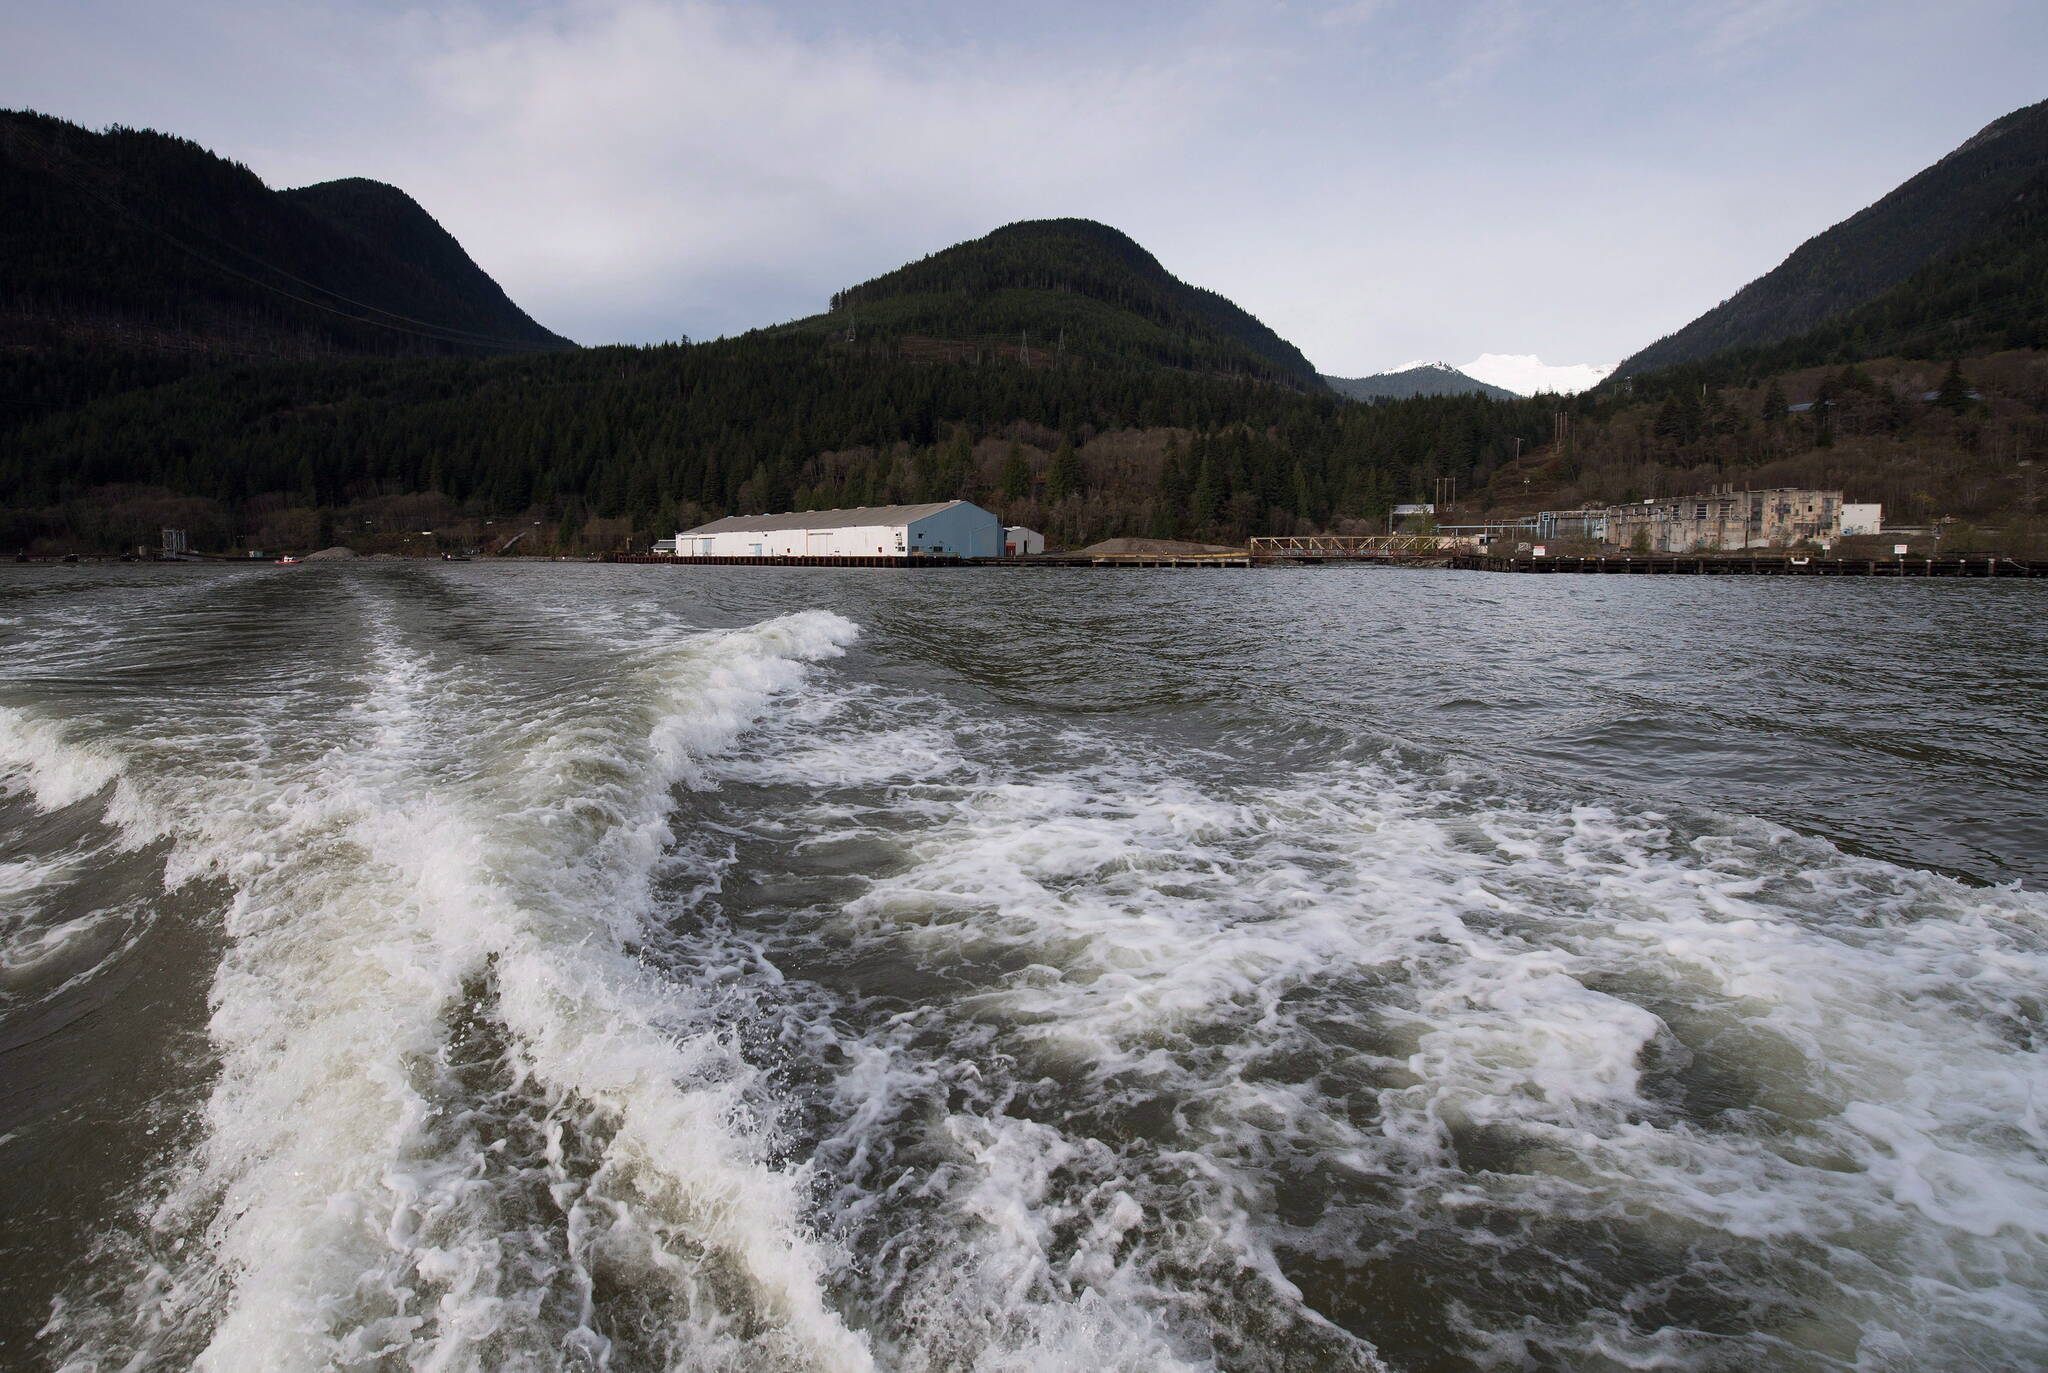 The Woodfibre LNG project site is seen on the waters of Howe Sound near Squamish, B.C., on Friday, Nov. 4, 2016. THE CANADIAN PRESS/Darryl Dyck